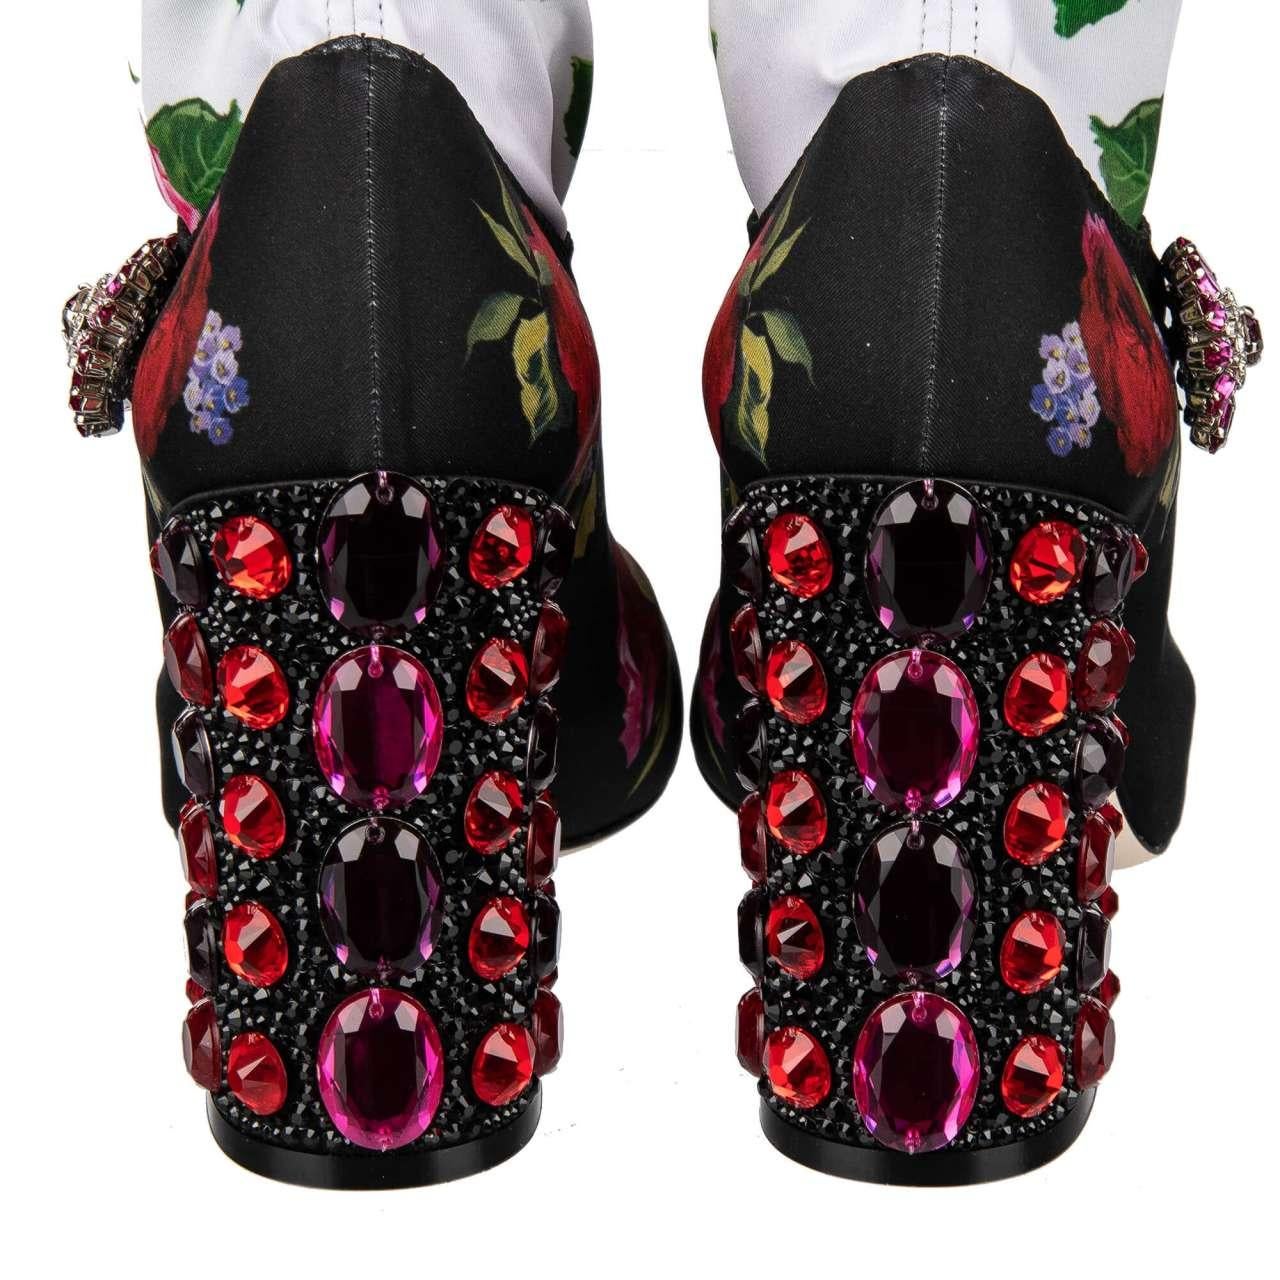 D&G Roses Printed Elastic Socks Pumps VALLY with Crystals Heel Black White 38 For Sale 2